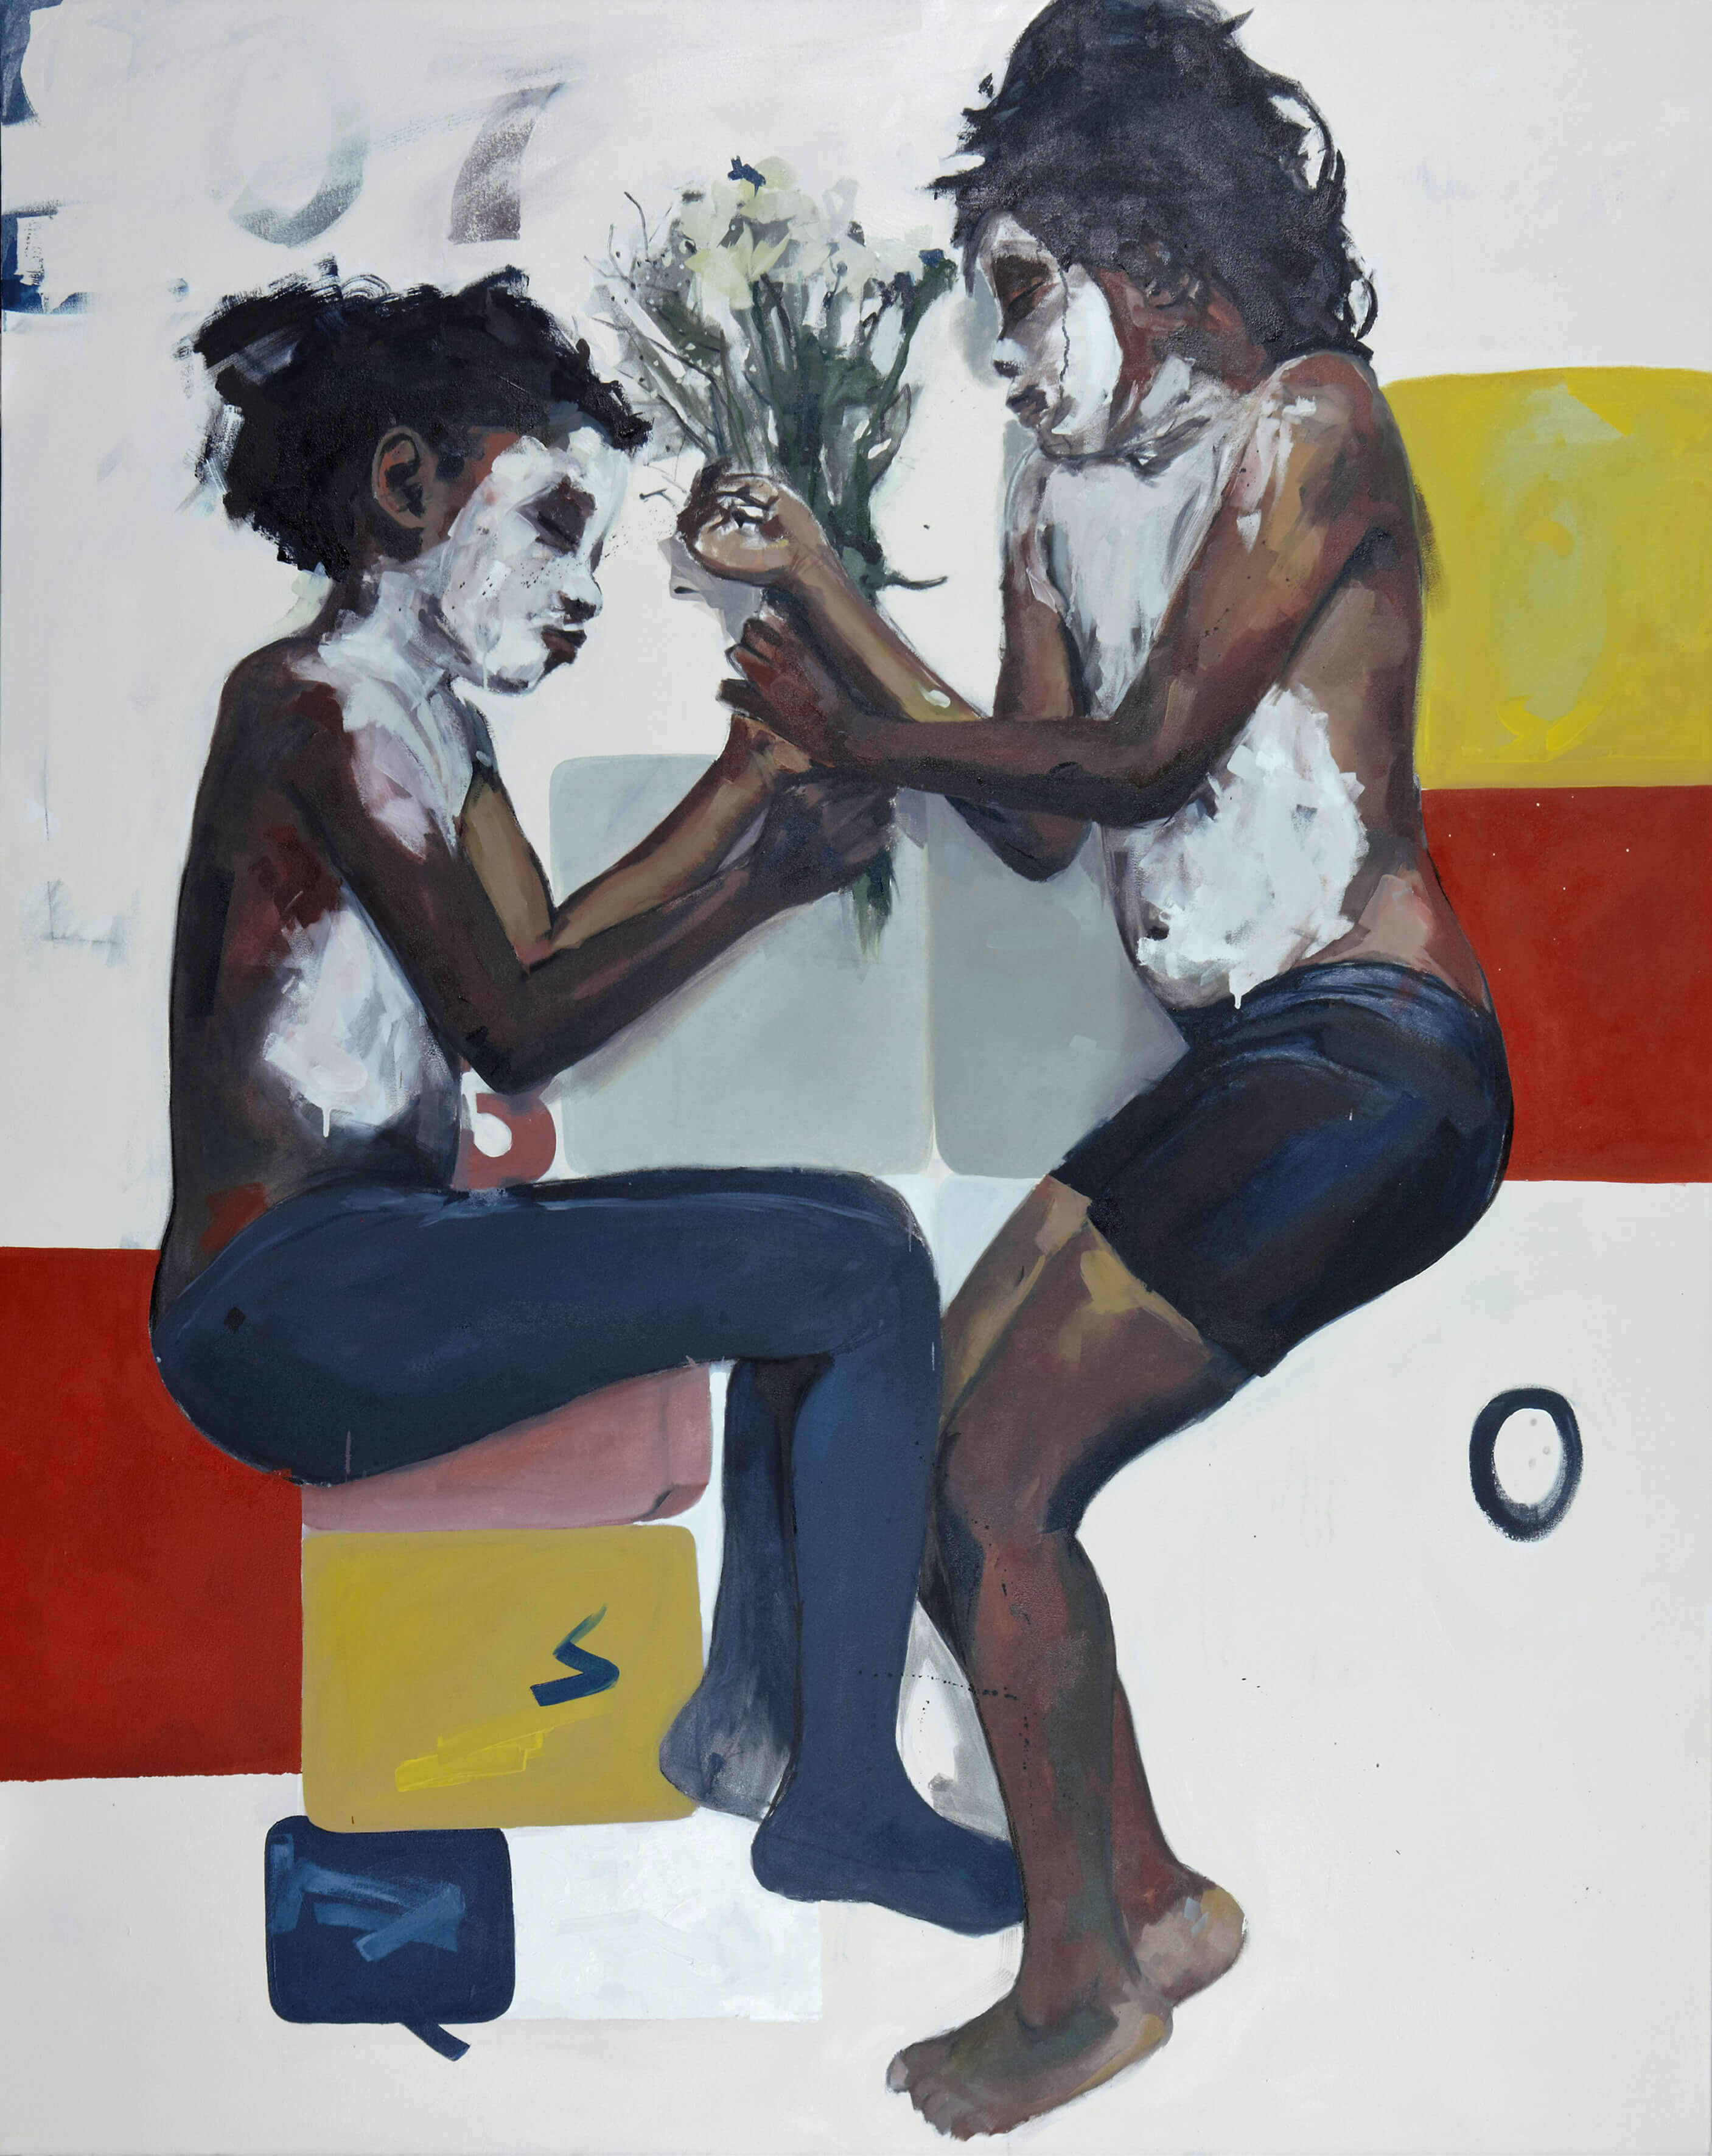 Kudzanai-Violet Hwami, Epilogue [Returning to the Garden], 2016, oil and acrylic on canvas, 214 x 170 cm, Courtesy of Tyburn Gallery